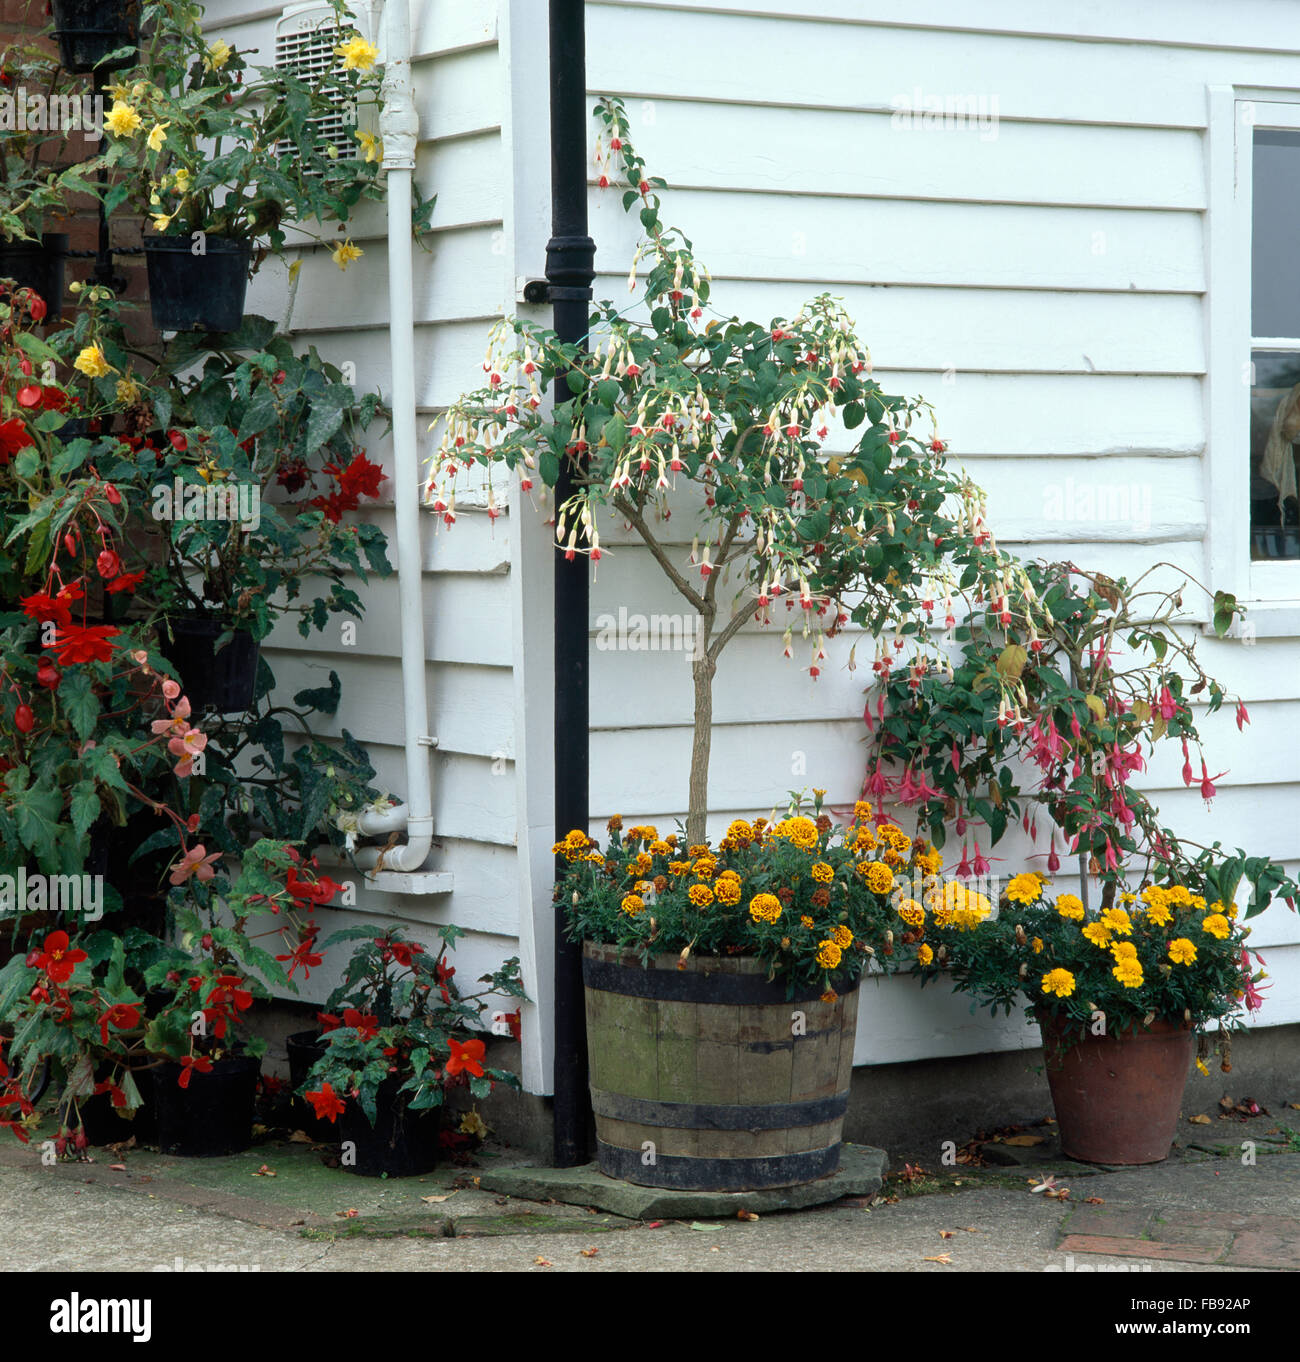 French marigolds in wooden barrels with standard fuchsias against cottage wall Stock Photo